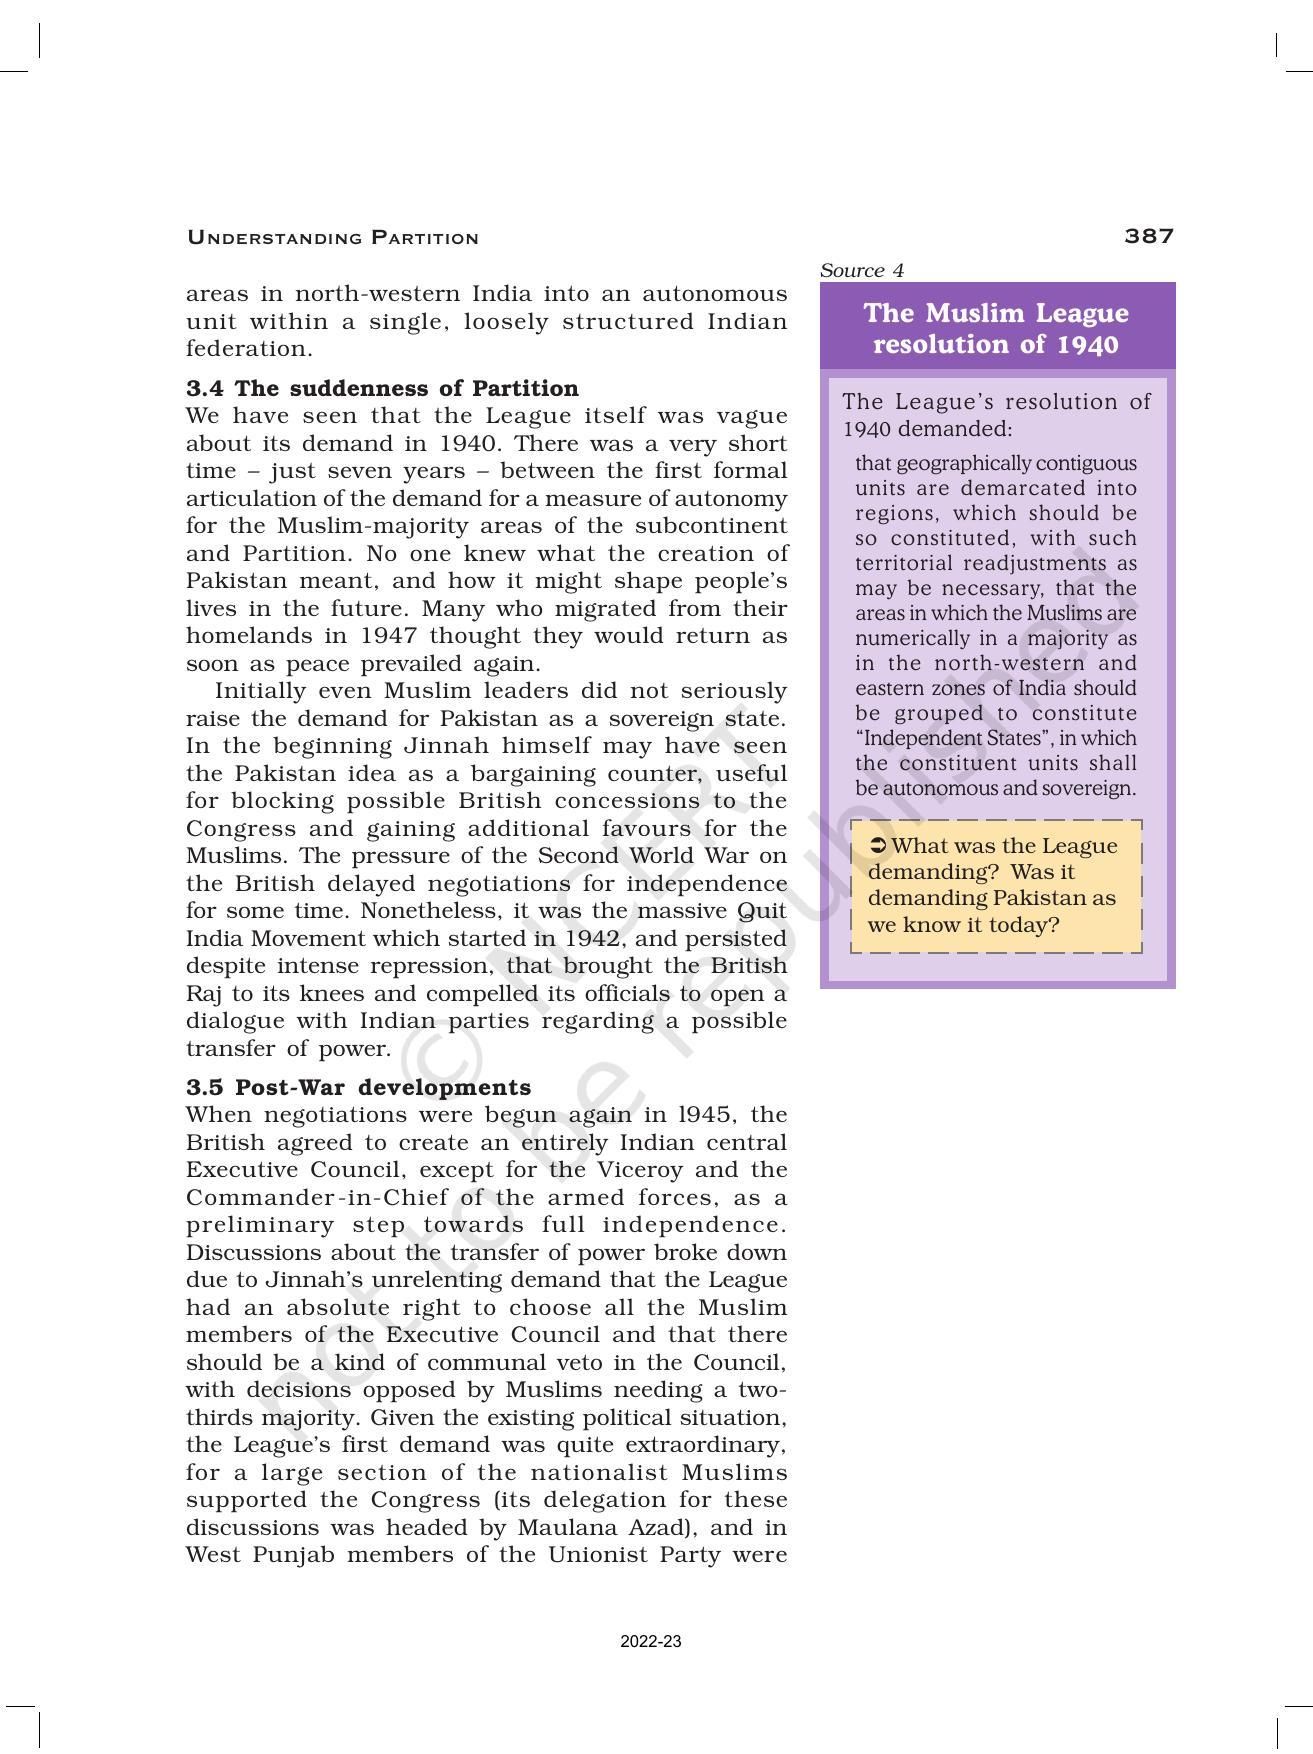 NCERT Book for Class 12 History (Part-III) Chapter 14 Understanding Partition - Page 12